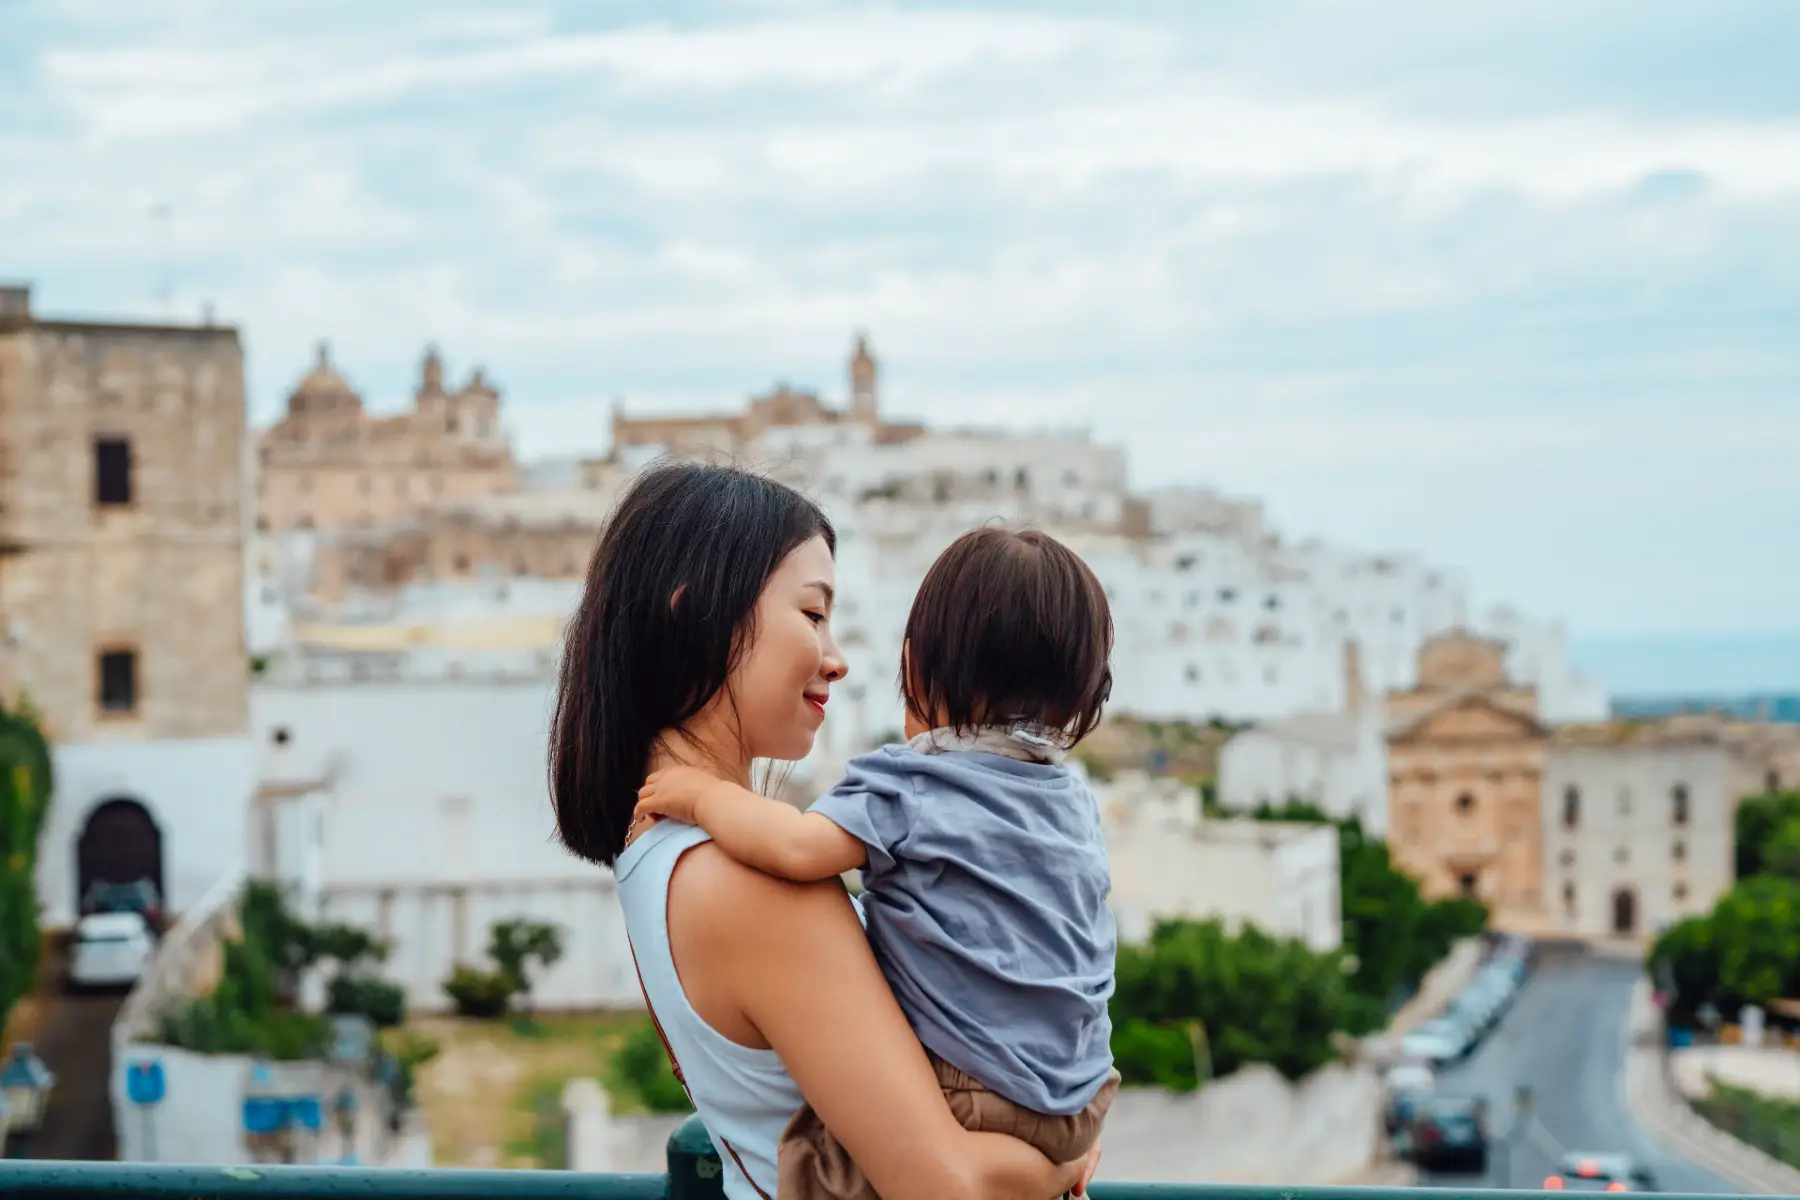 Young mother smiling lovingly at the toddler in her arms, with the old town of Ostuni (Italy) in the background.